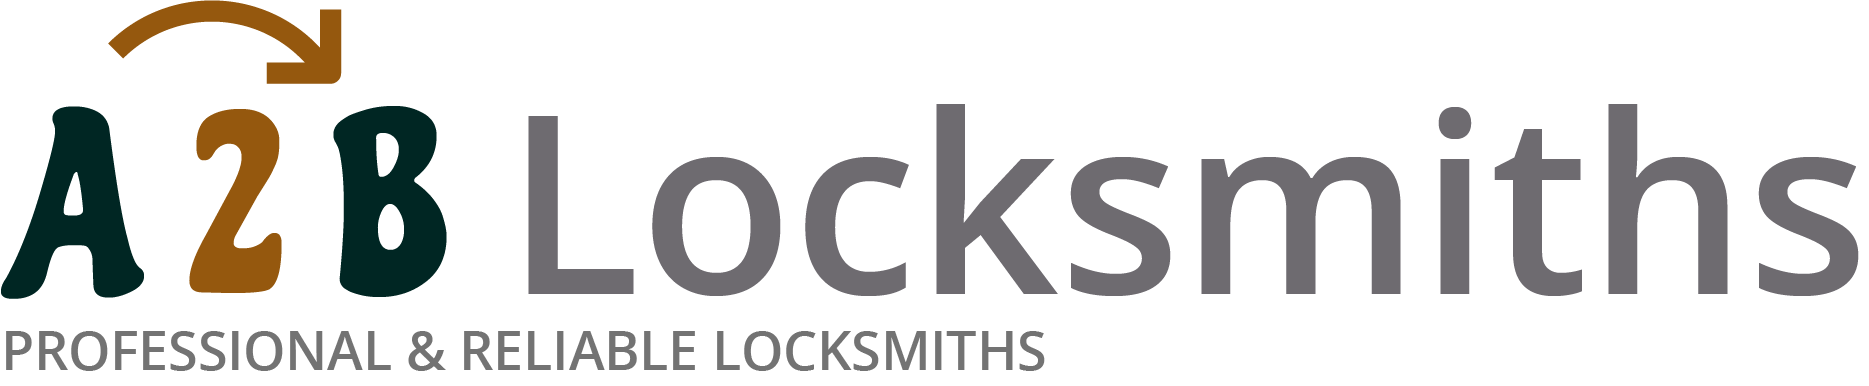 If you are locked out of house in Finsbury, our 24/7 local emergency locksmith services can help you.